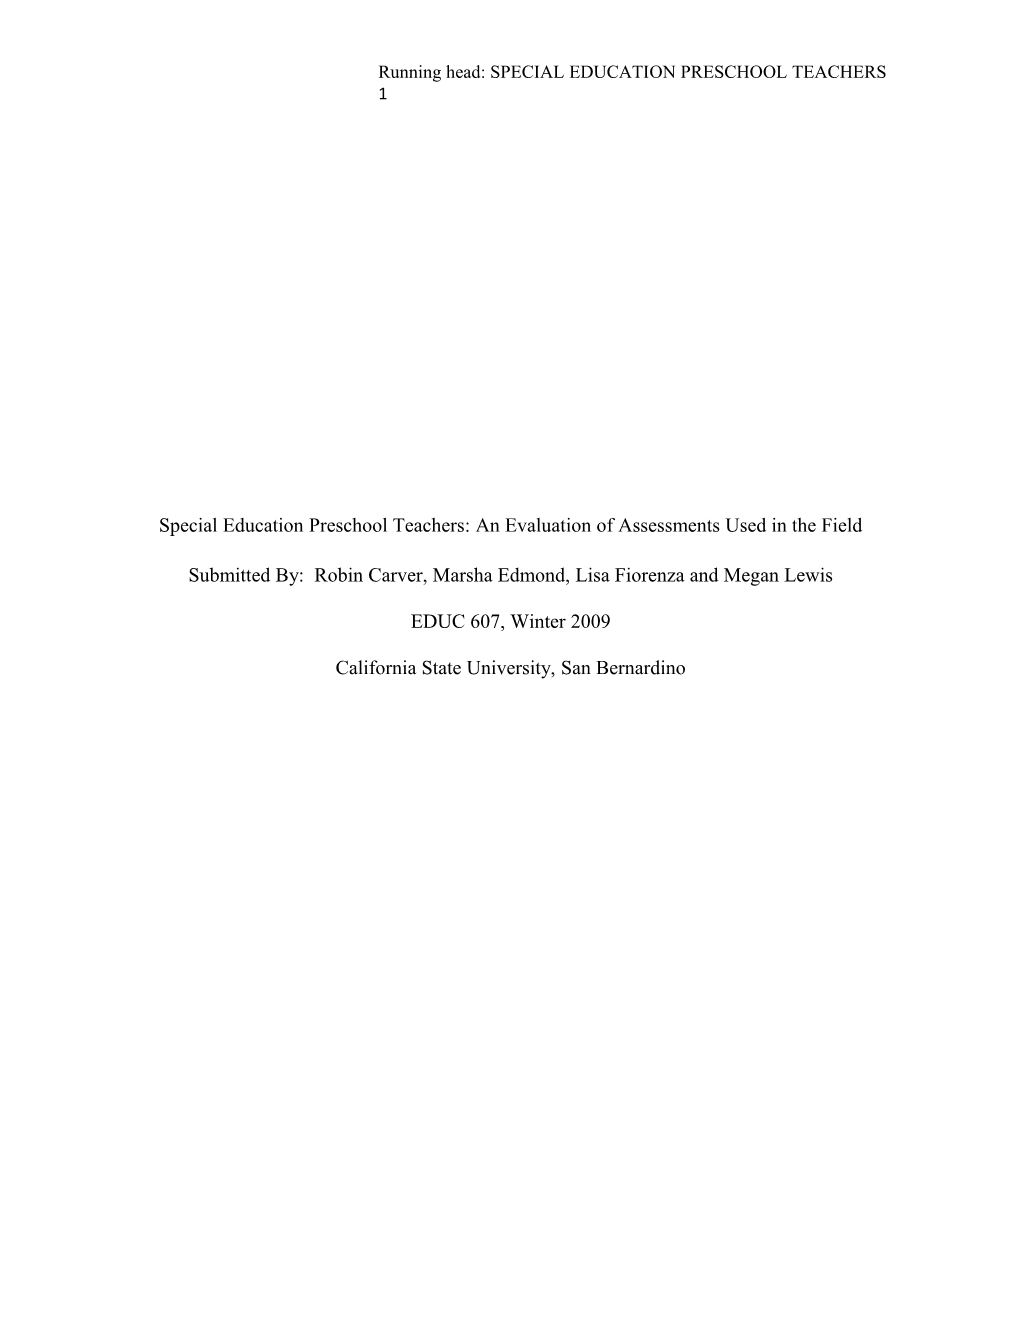 Special Education Preschool Teachers: an Evaluation of Assessments Used in the Field